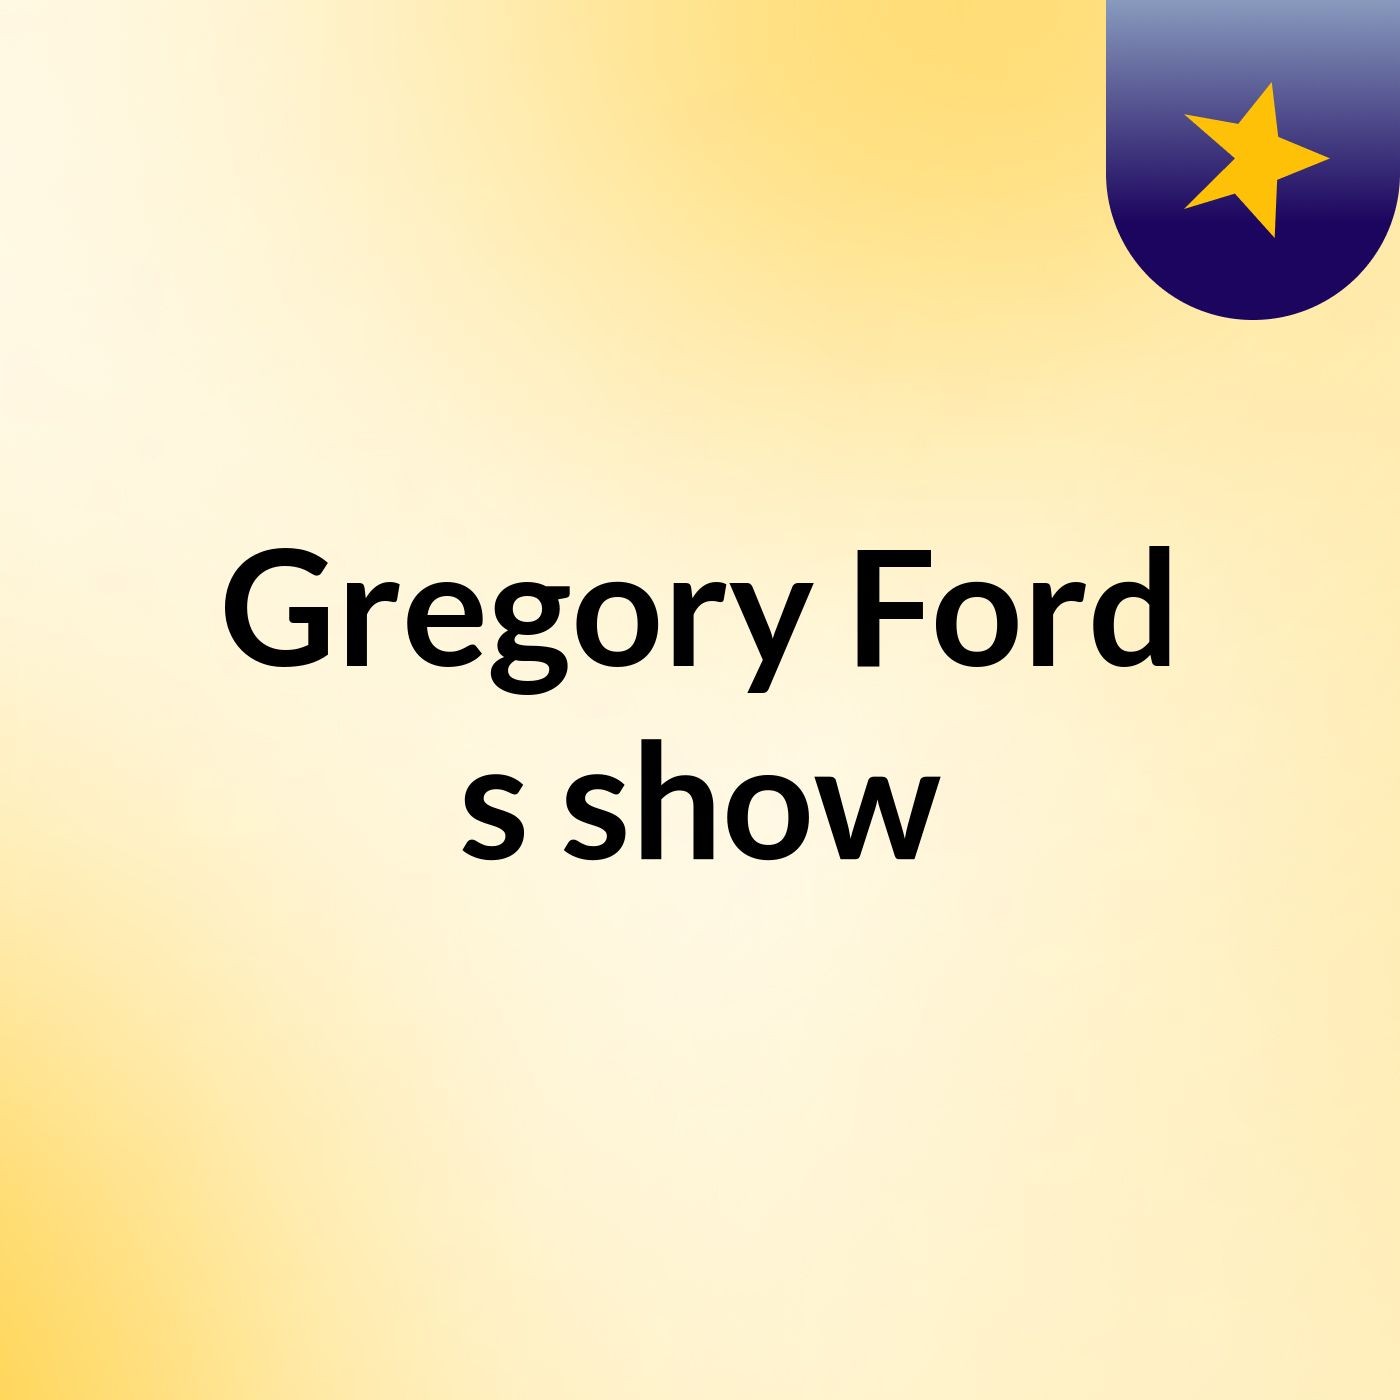 Episode 16 - Gregory Ford's show